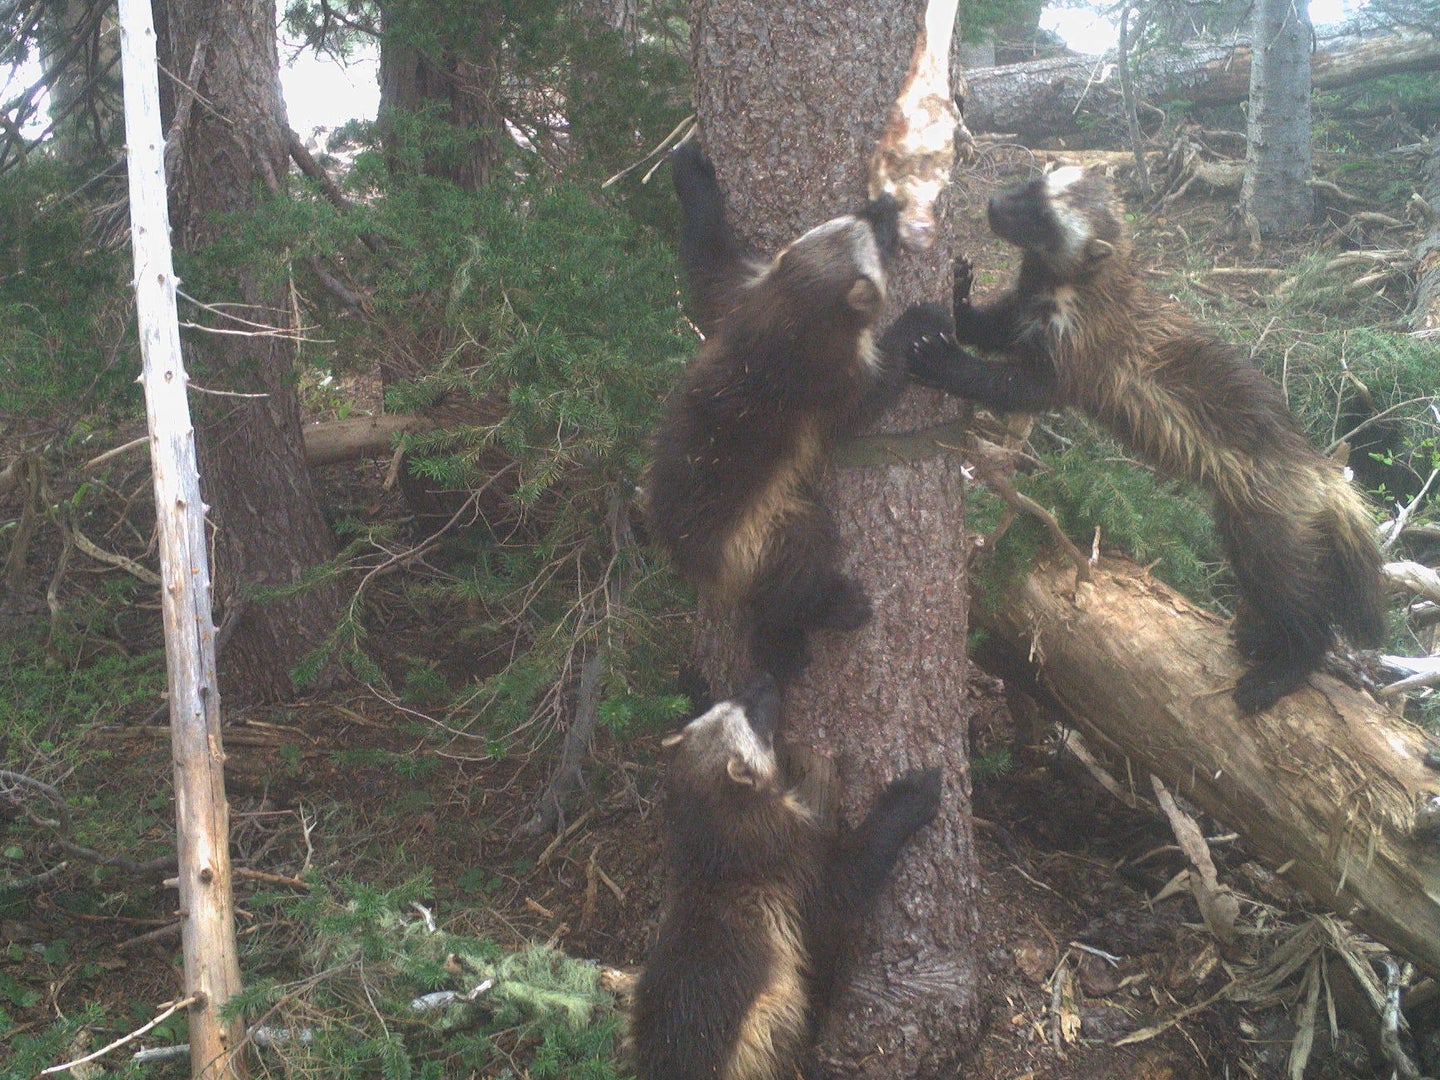 A mother wolverine and her kits ascend a tree.